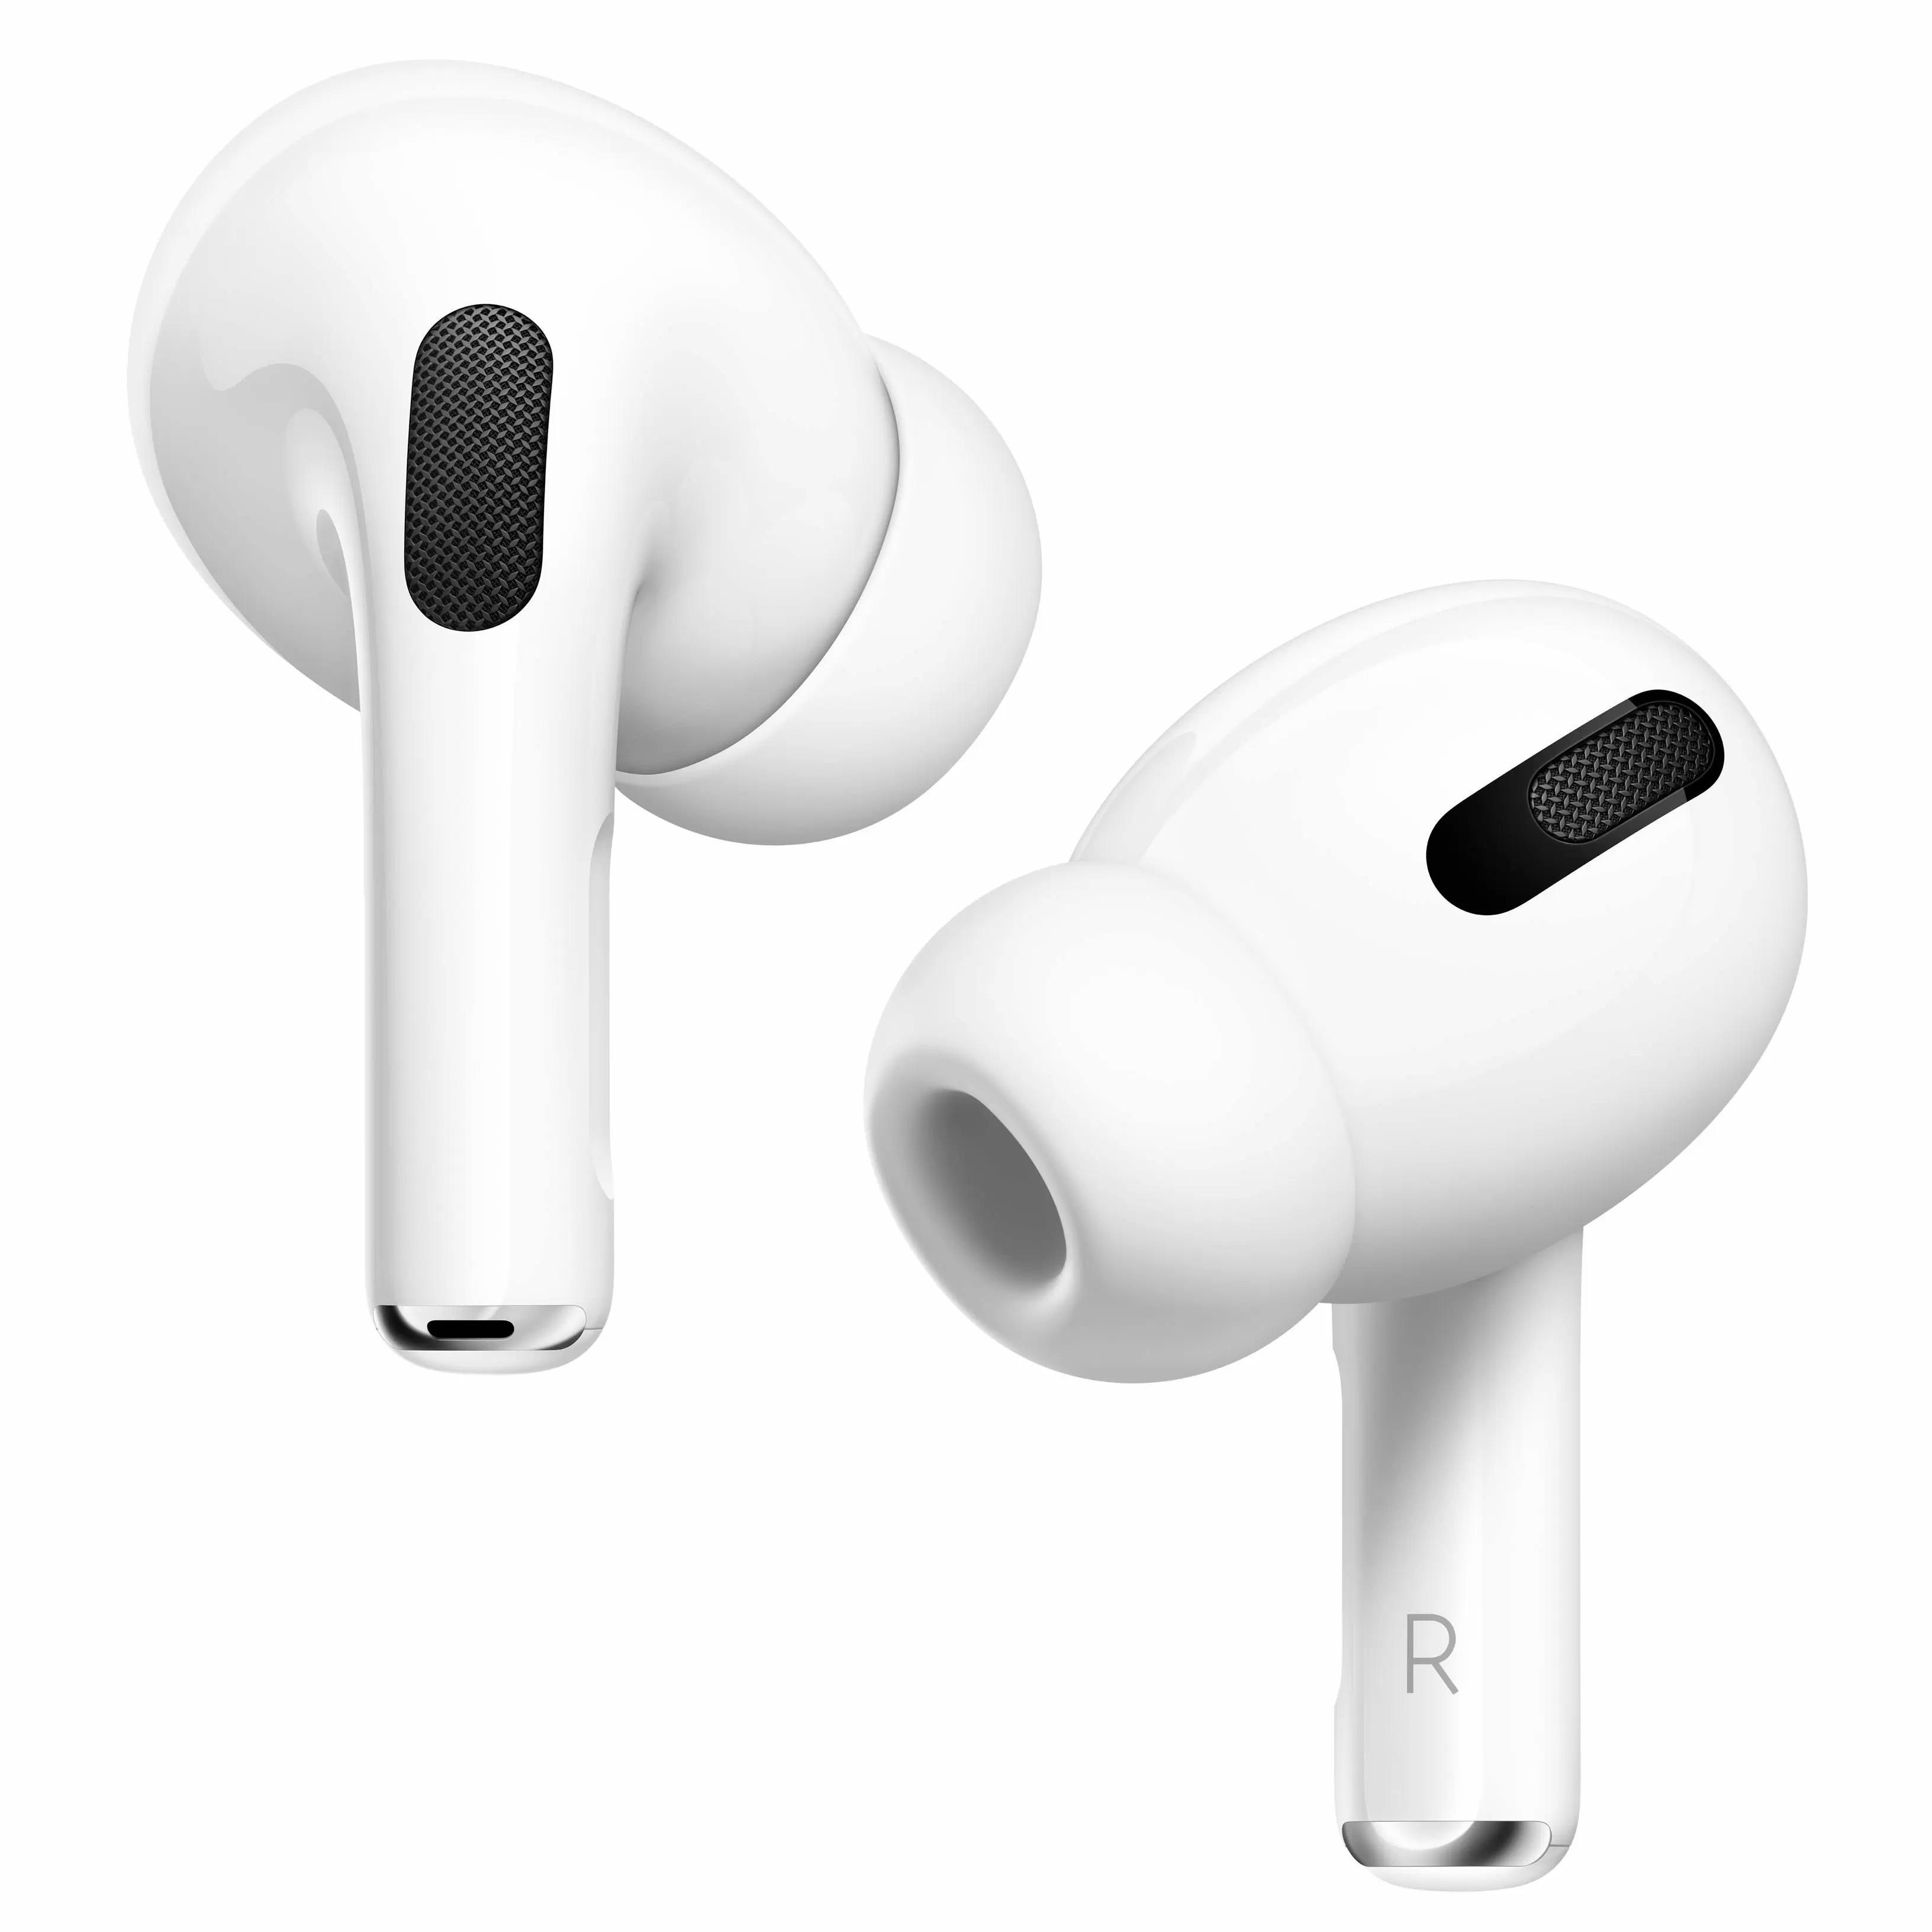 Walmart Black Friday! Apple AirPods Pro for $169 Shipped